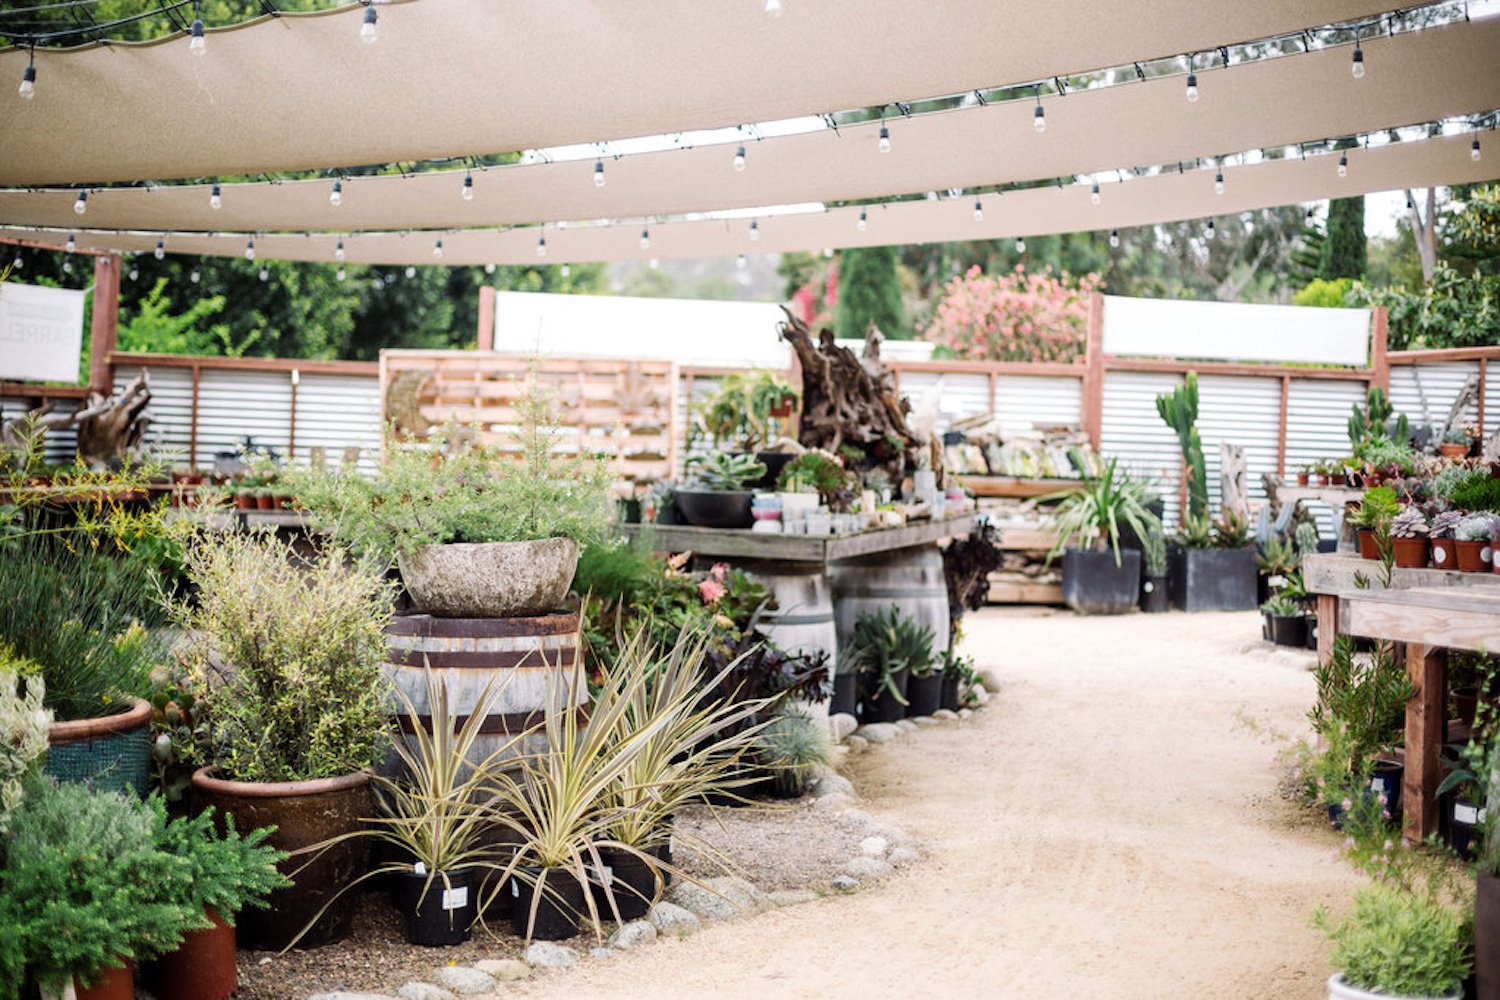 Branches and Barrels, one of San Diego's best plant shops and nurseries